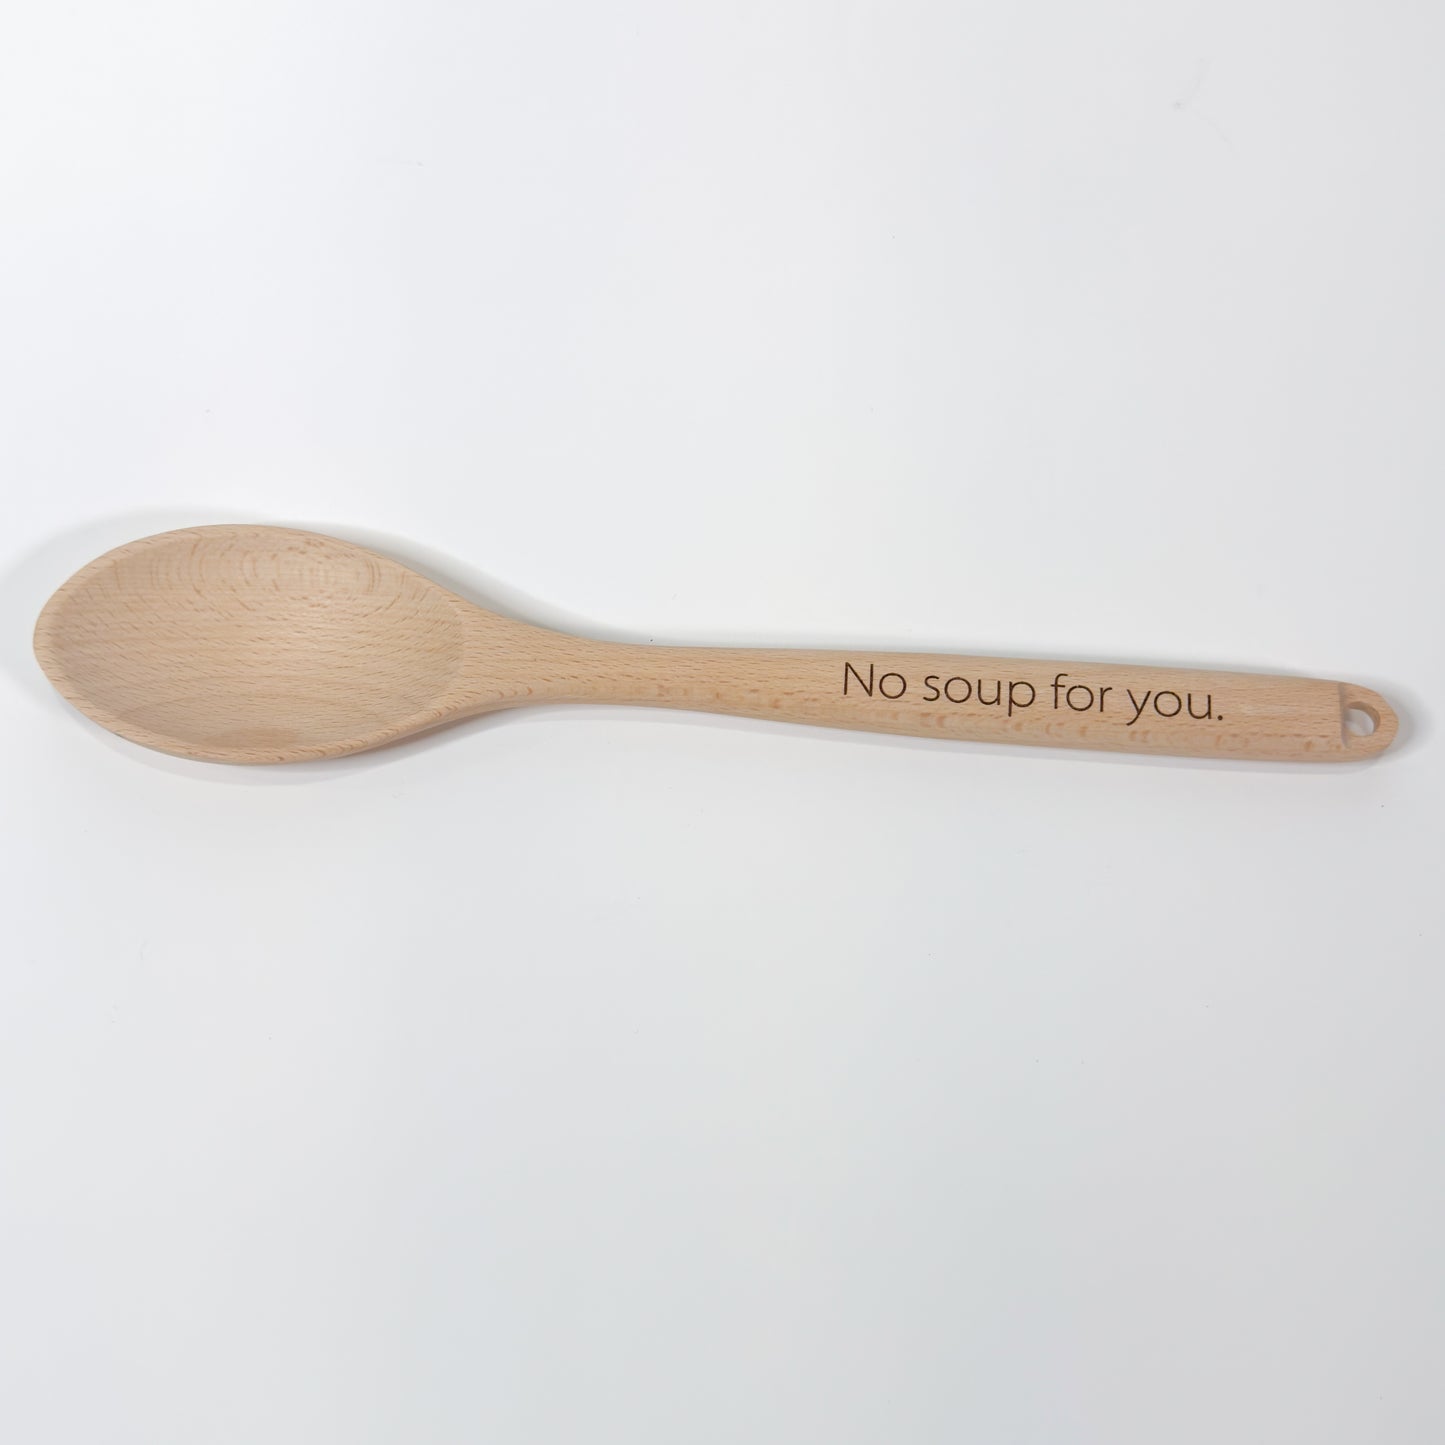 Engraved Wood Spoon, "No soup for you"